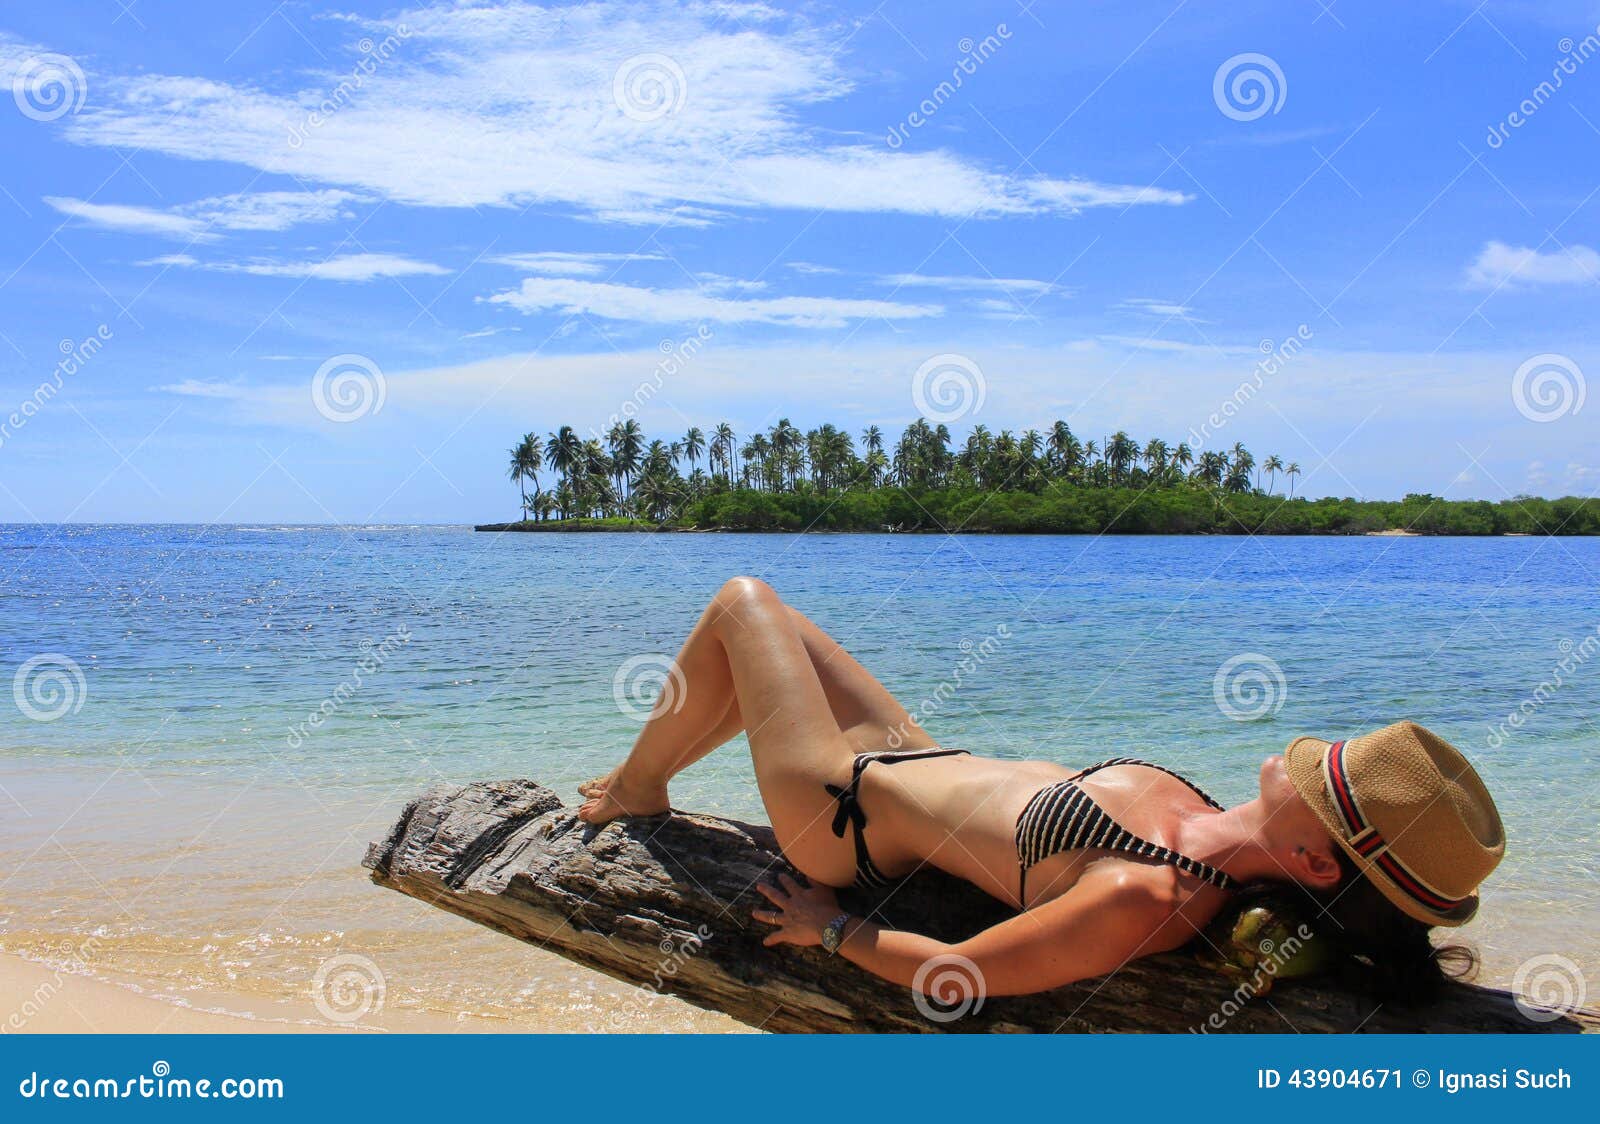 young beautiful woman enjoying her time and restin